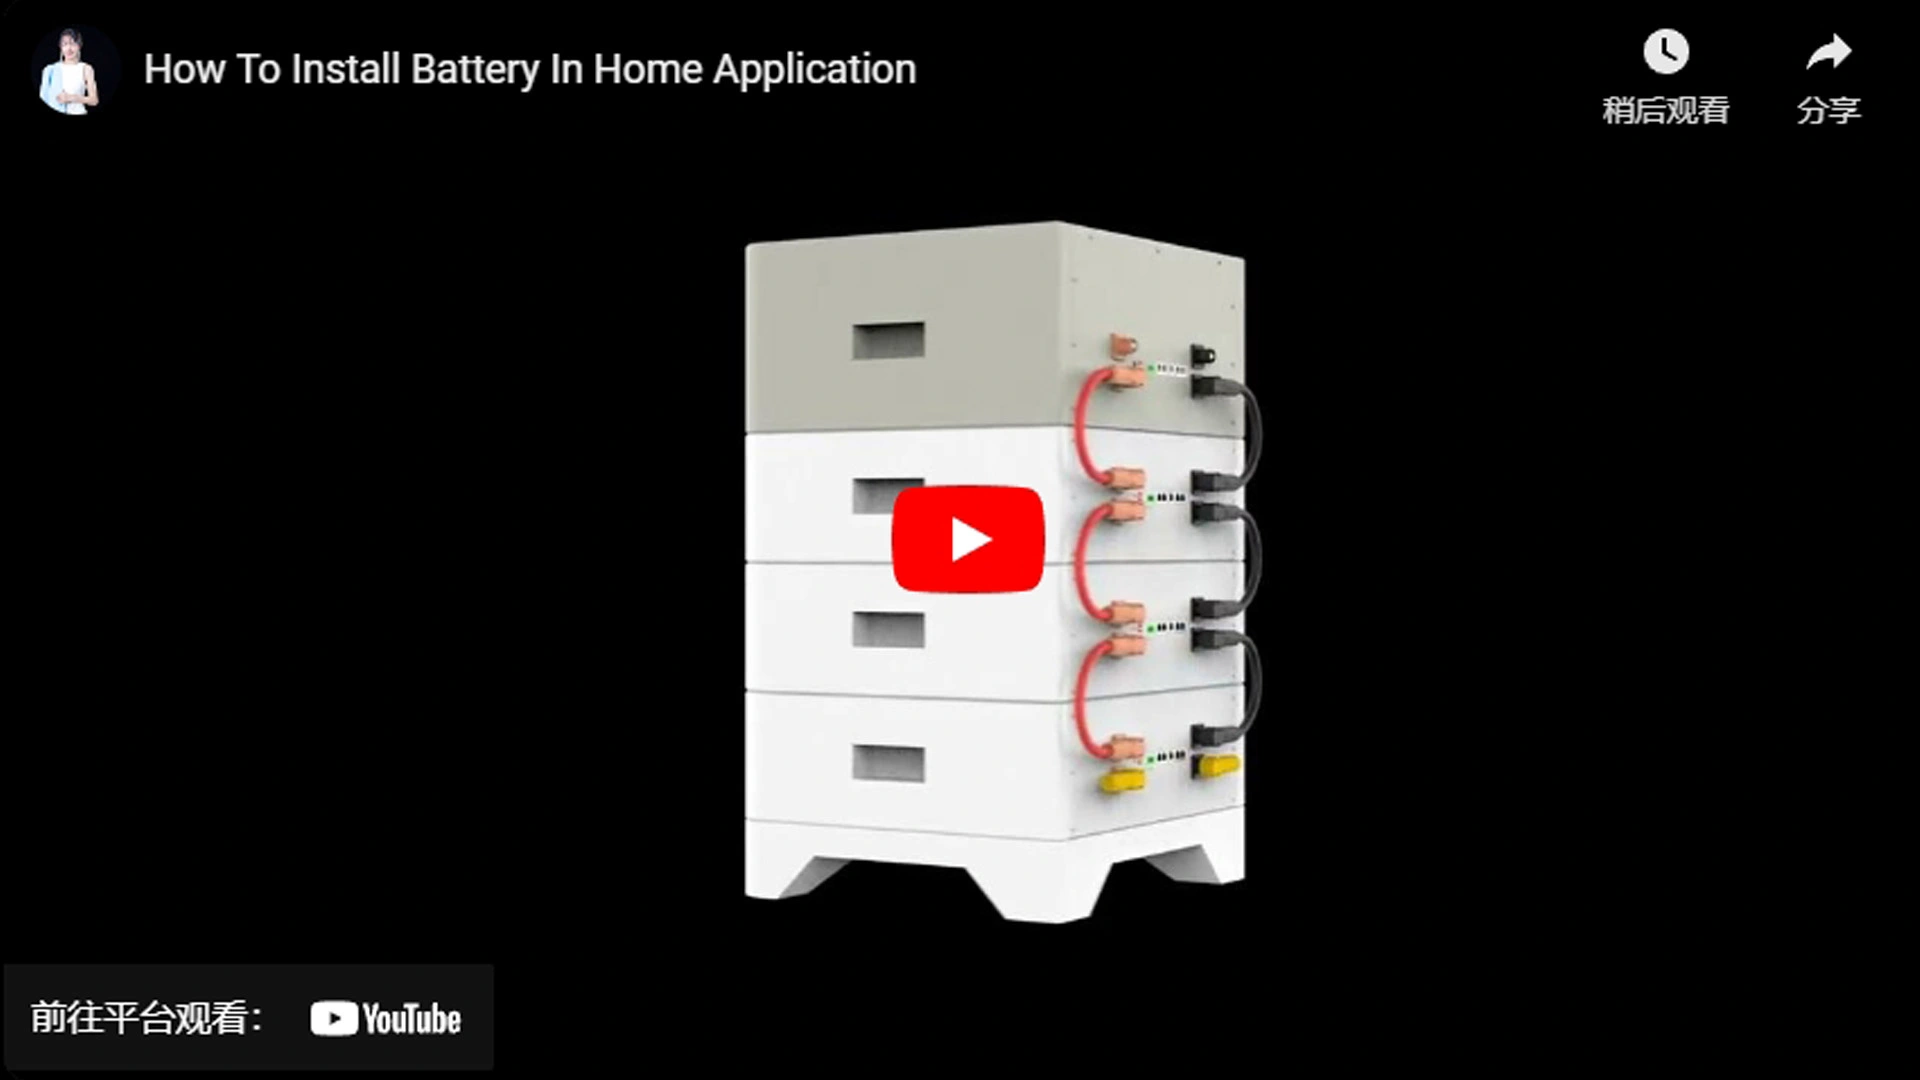 How To Install Battery In Home Application